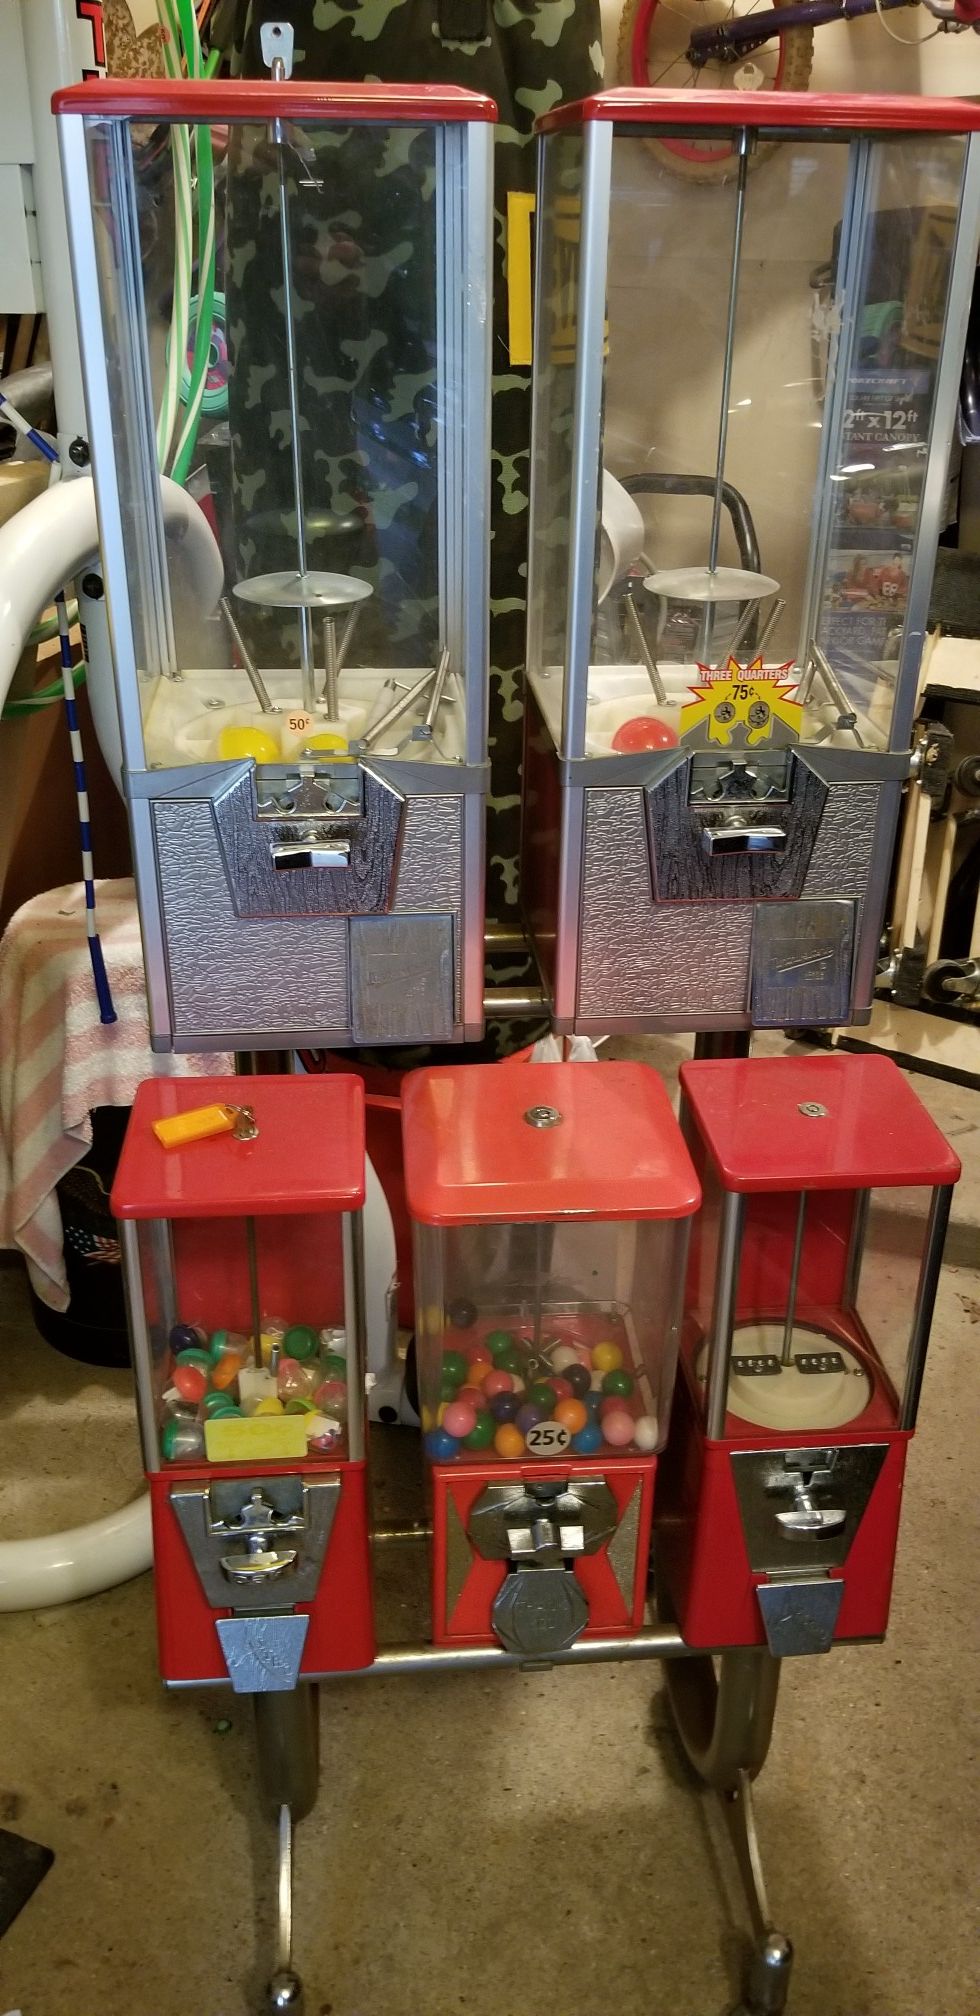 Gumball candy and toy capsule machines